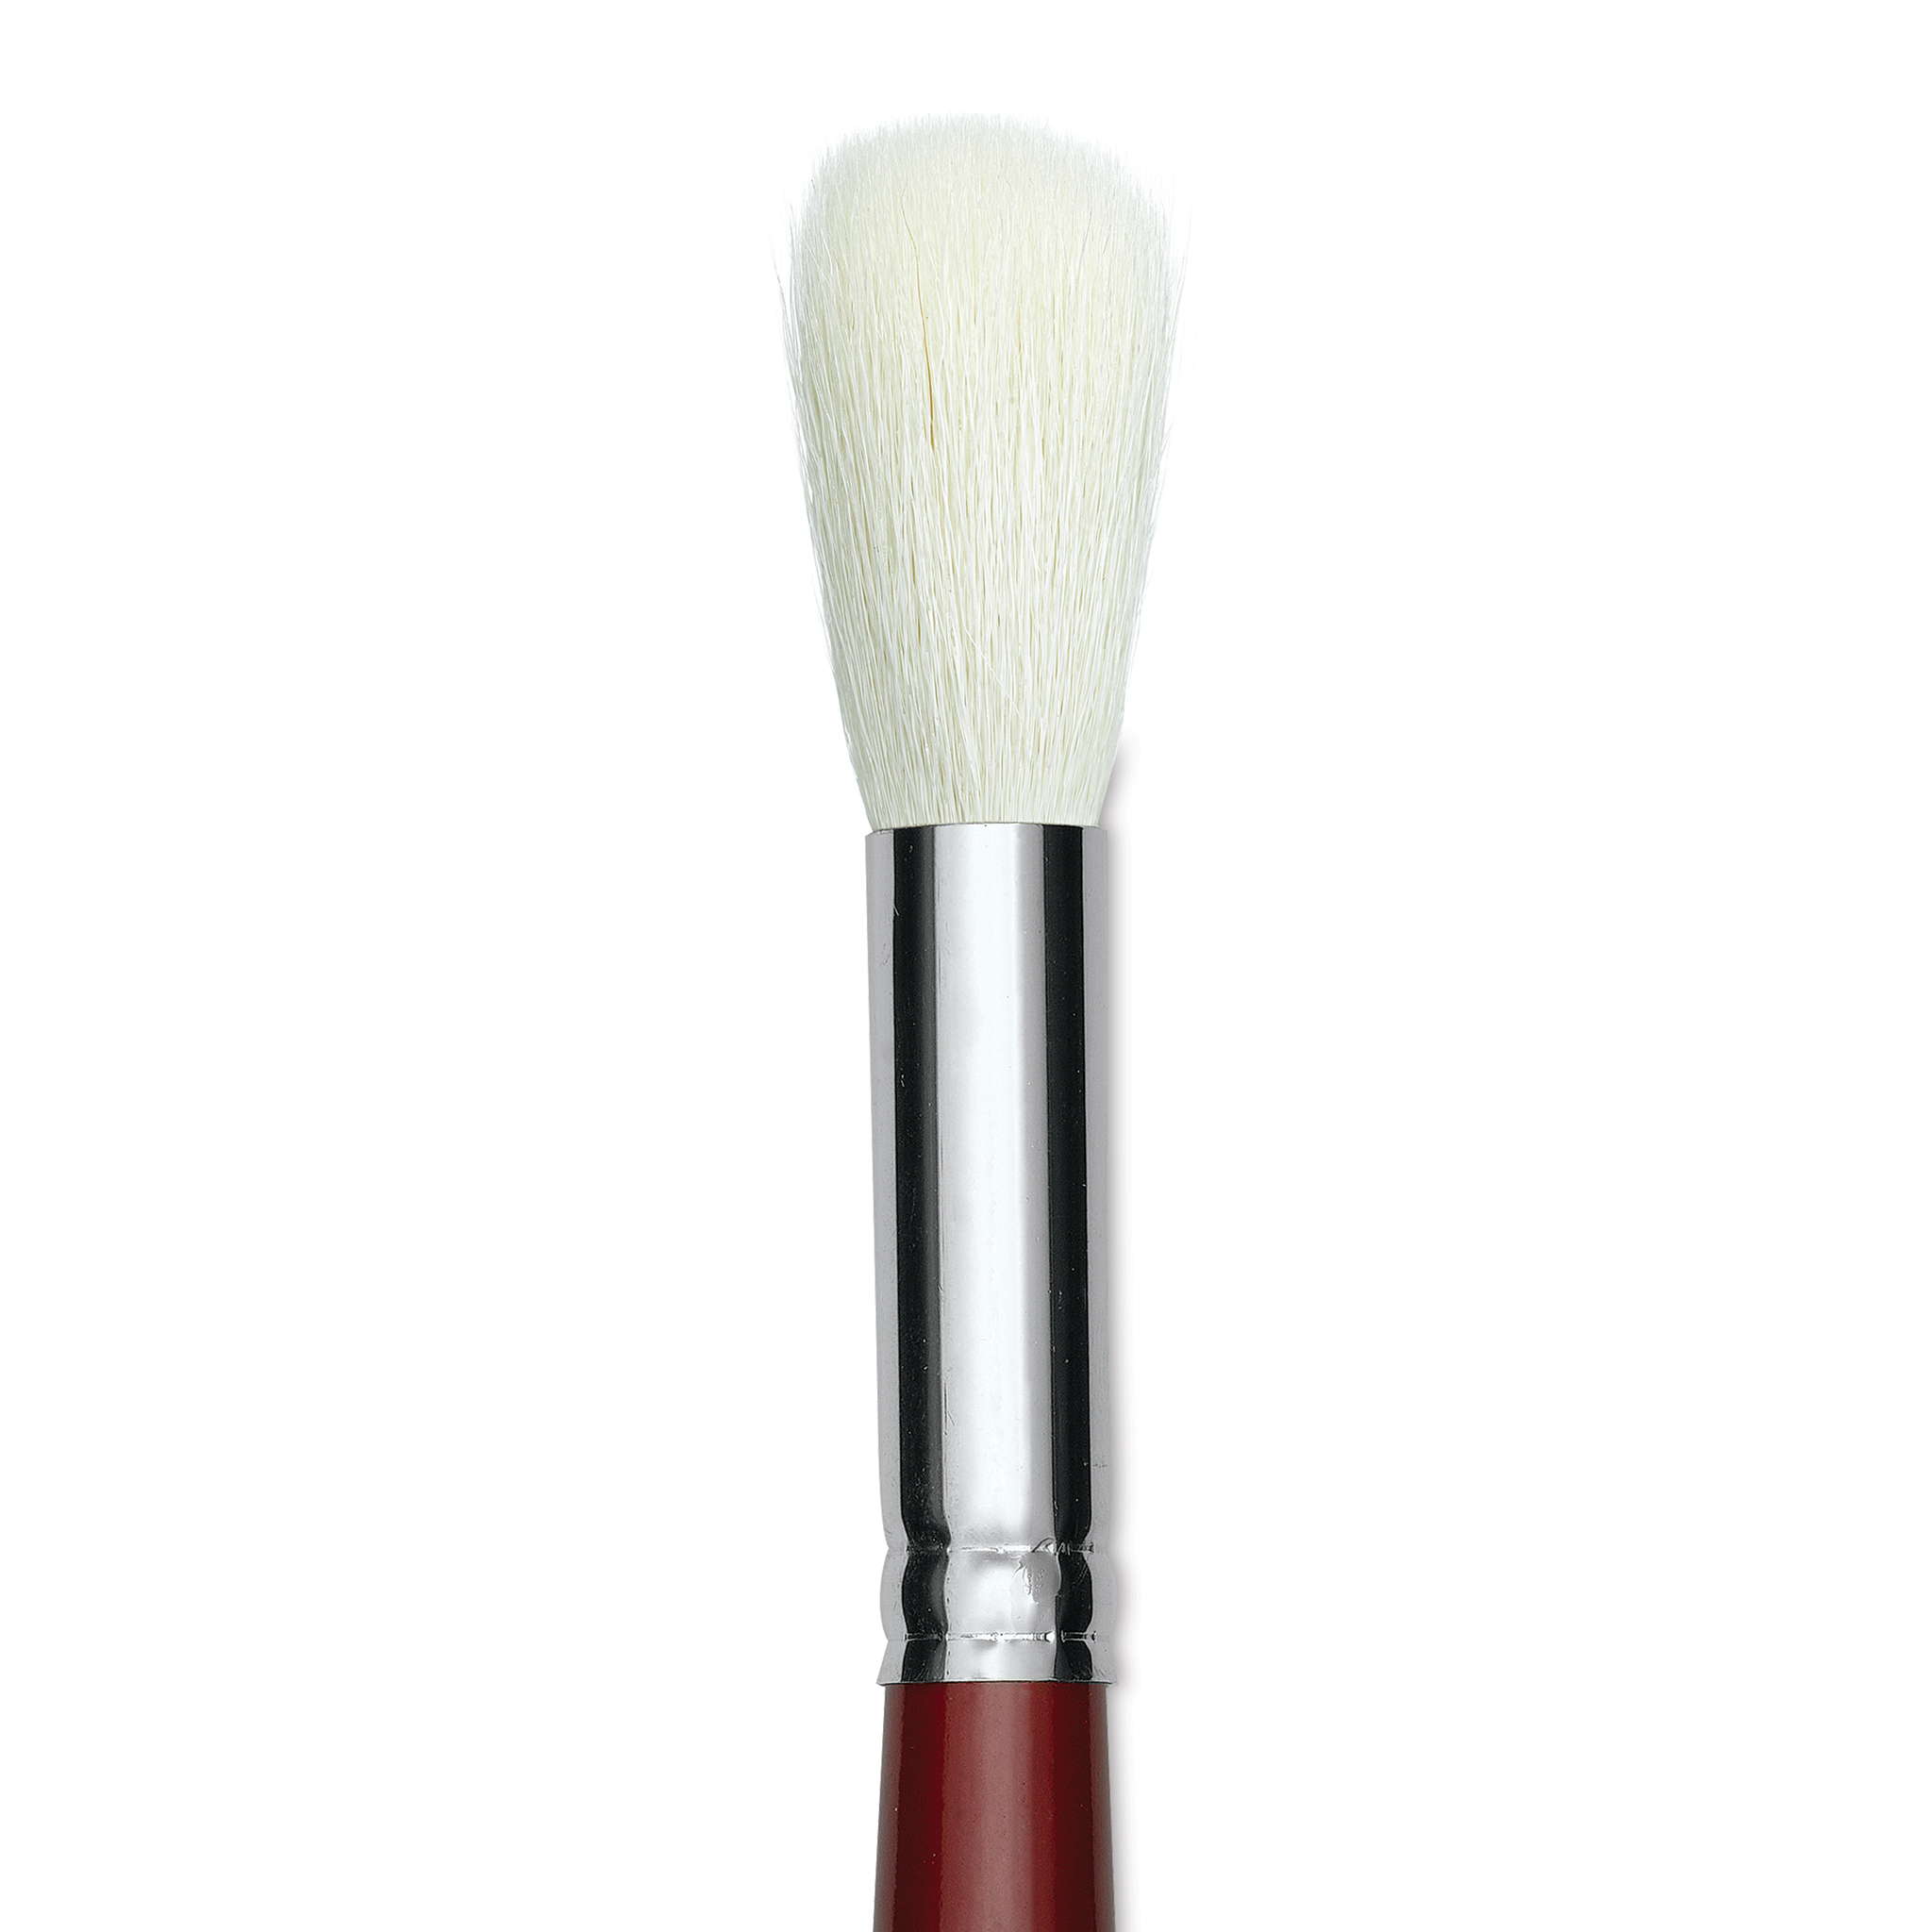 White Round Mop 5518S-20 by Silver Brush - Brushes and More